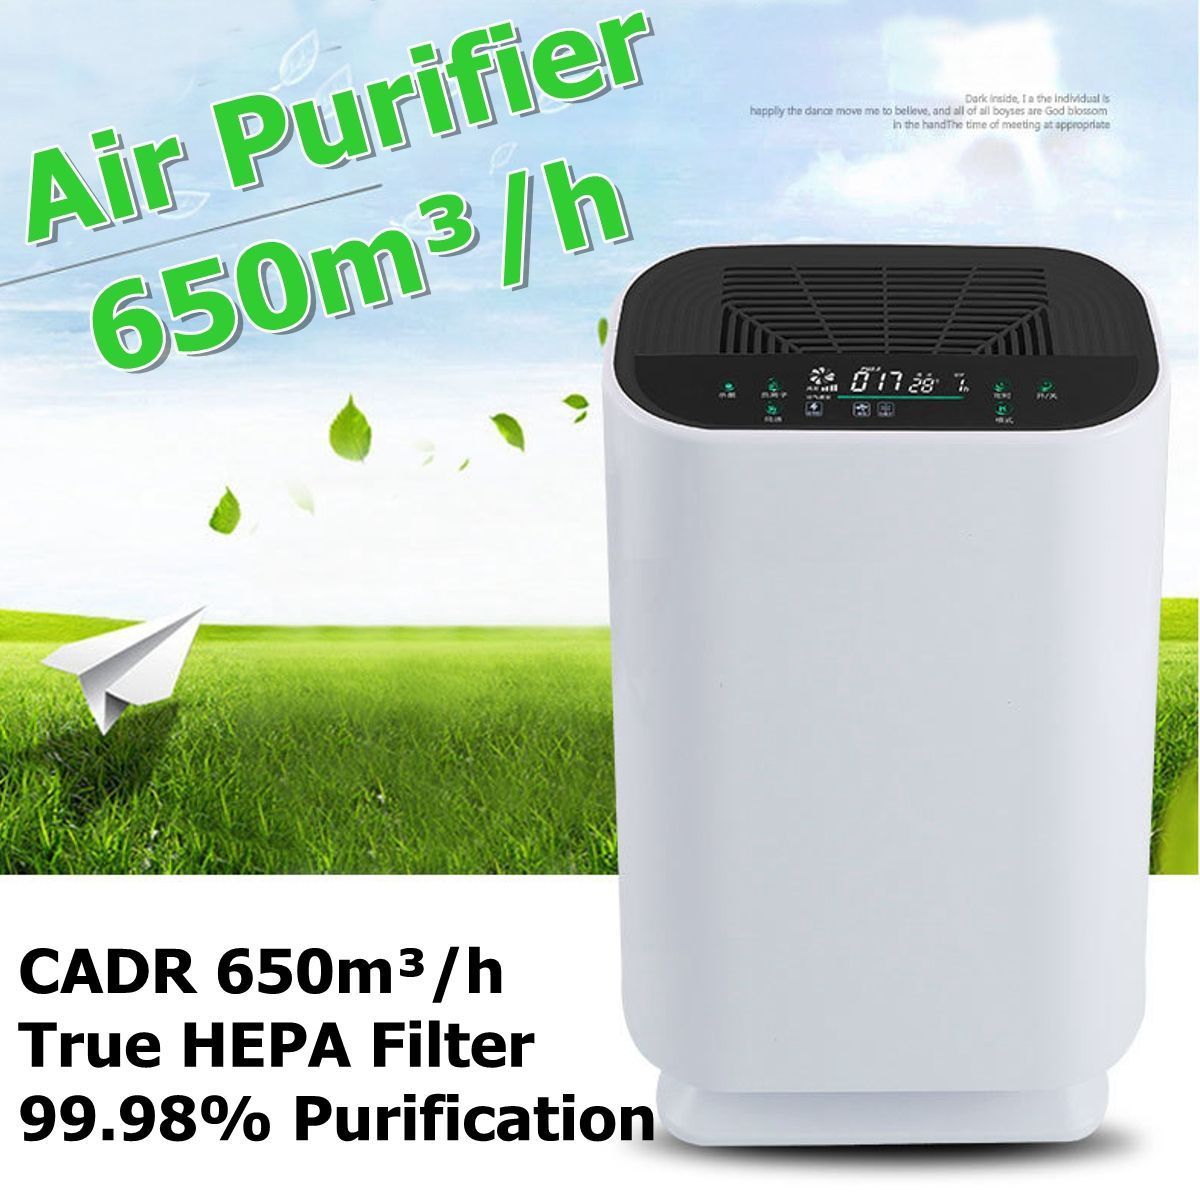 Air-Purifier-Ioniser-Quiet-Mode-Hepa-With-Dual-Filtration-Filter-Ionizer-HEPA-1579314